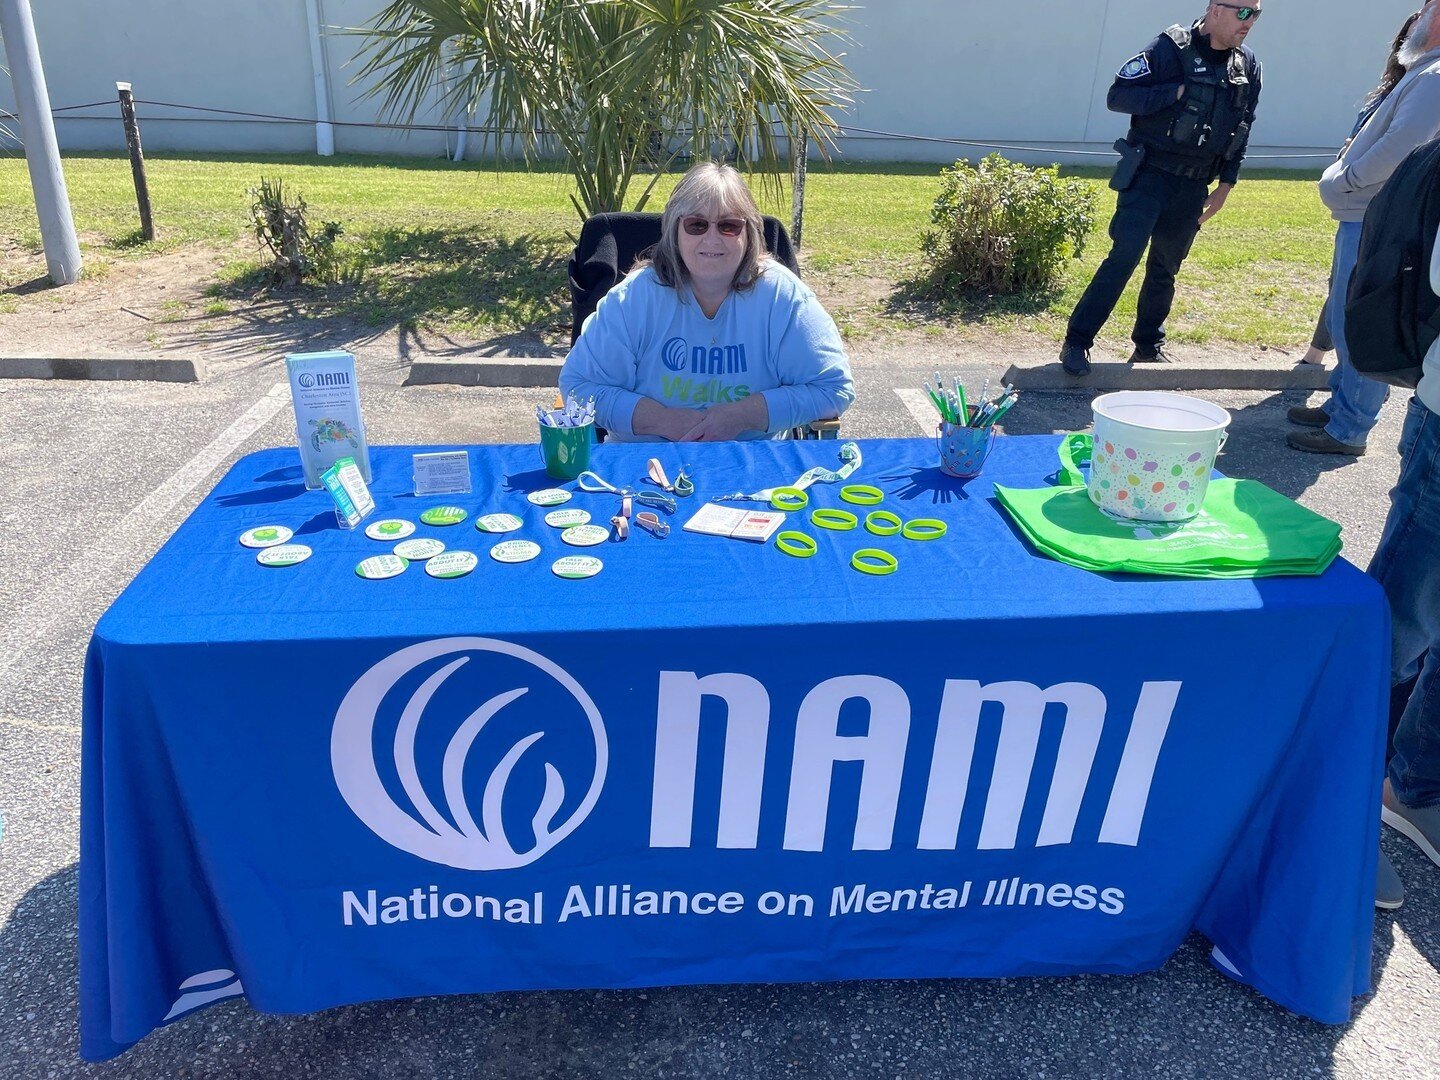 Mary Carr Thrilled to be tabling at The Community Kitchen of Myrtle Beach this past week, spreading mental health awareness and support to our community. ⁠
⁠
Together, let's nourish both body and mind💙⁠
⁠
⁠
#NAMI #NAMICHSAREA #SelfCare #MentalHealth